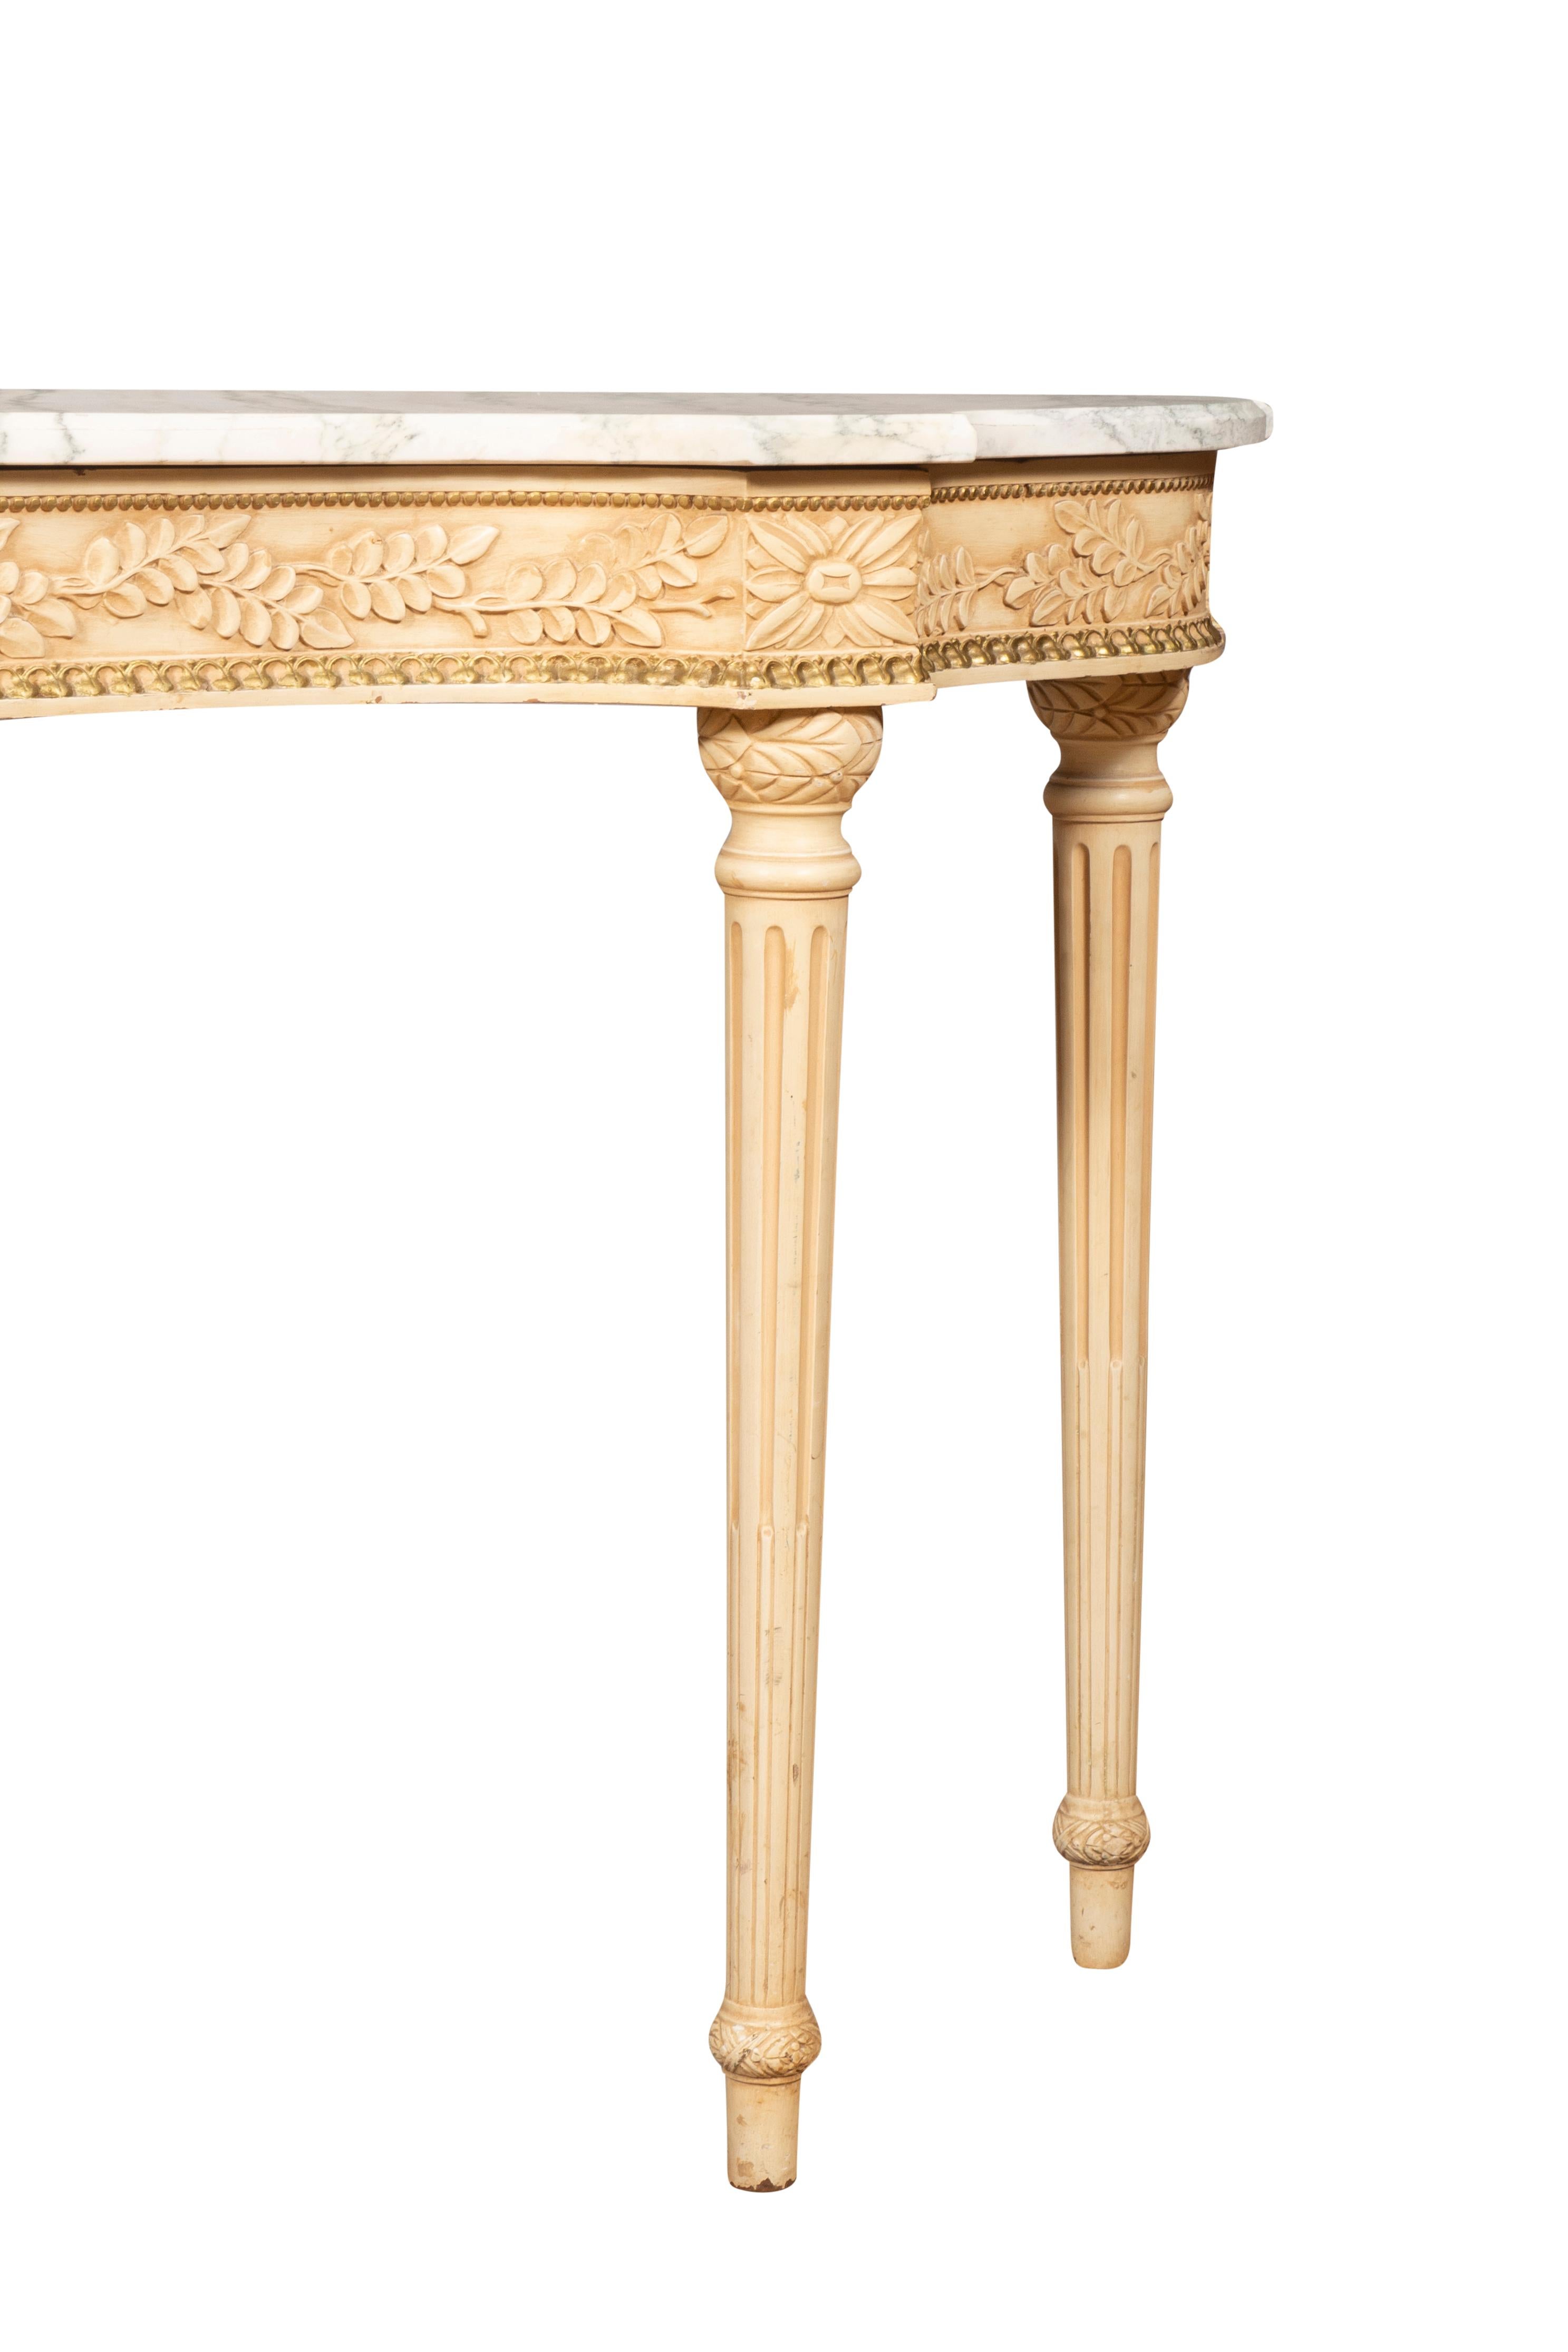 Maison Jansen Louis XVI Style White Painted Console Table From The Waldorf In Good Condition For Sale In Essex, MA